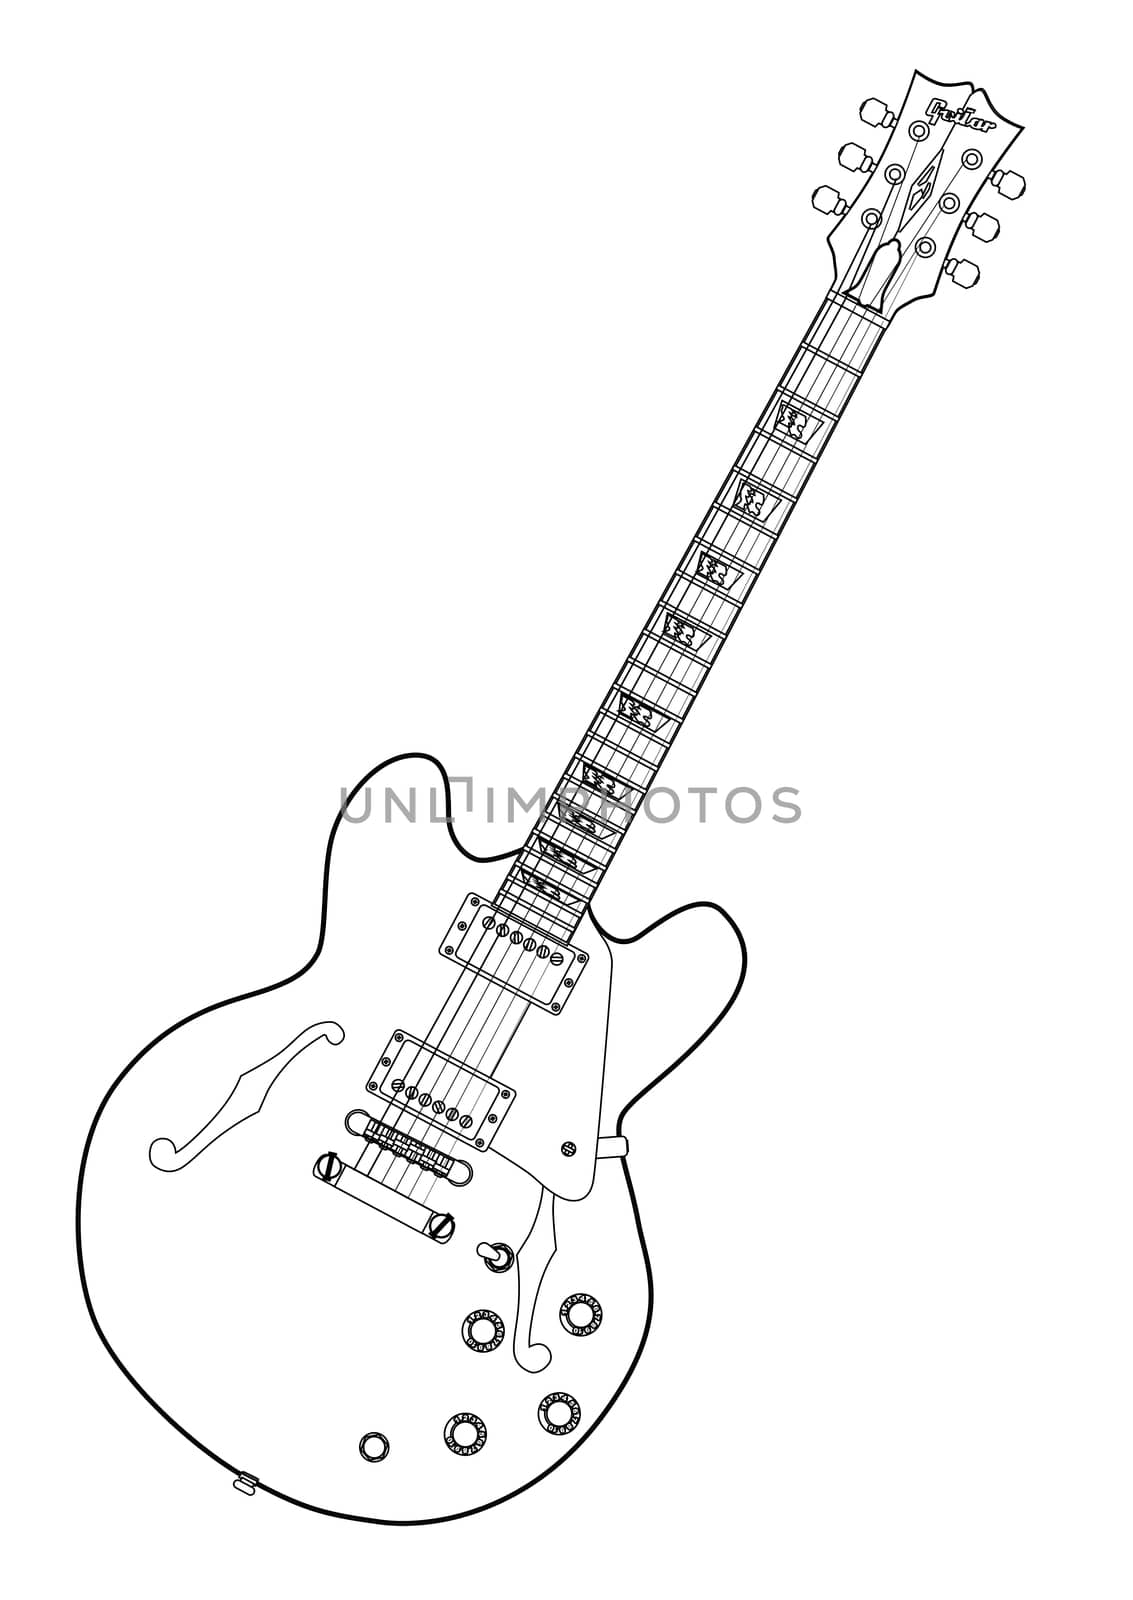 A semi acoustic type guitar in outline drawing set in a white background.